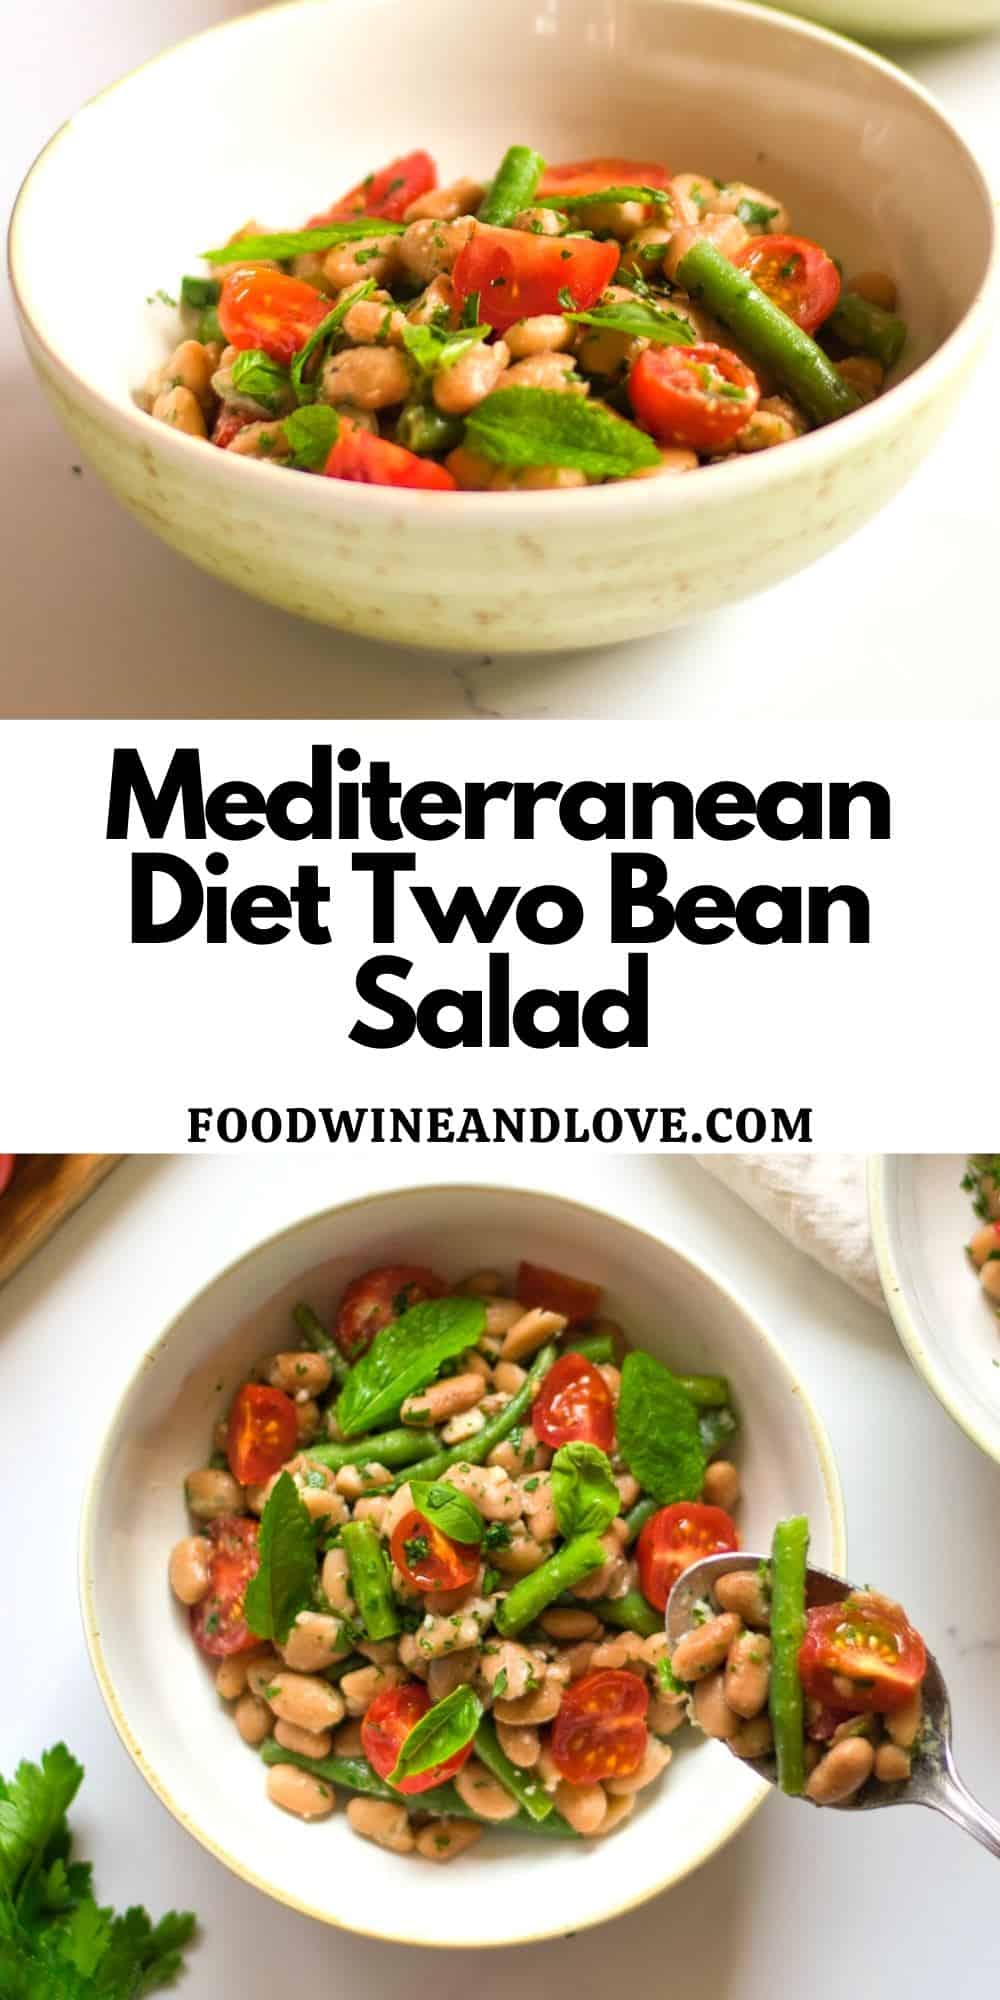 Mediterranean Diet Two Bean Salad, a delicious appetizer or side dish made with green and pinto beans with tomatoes.